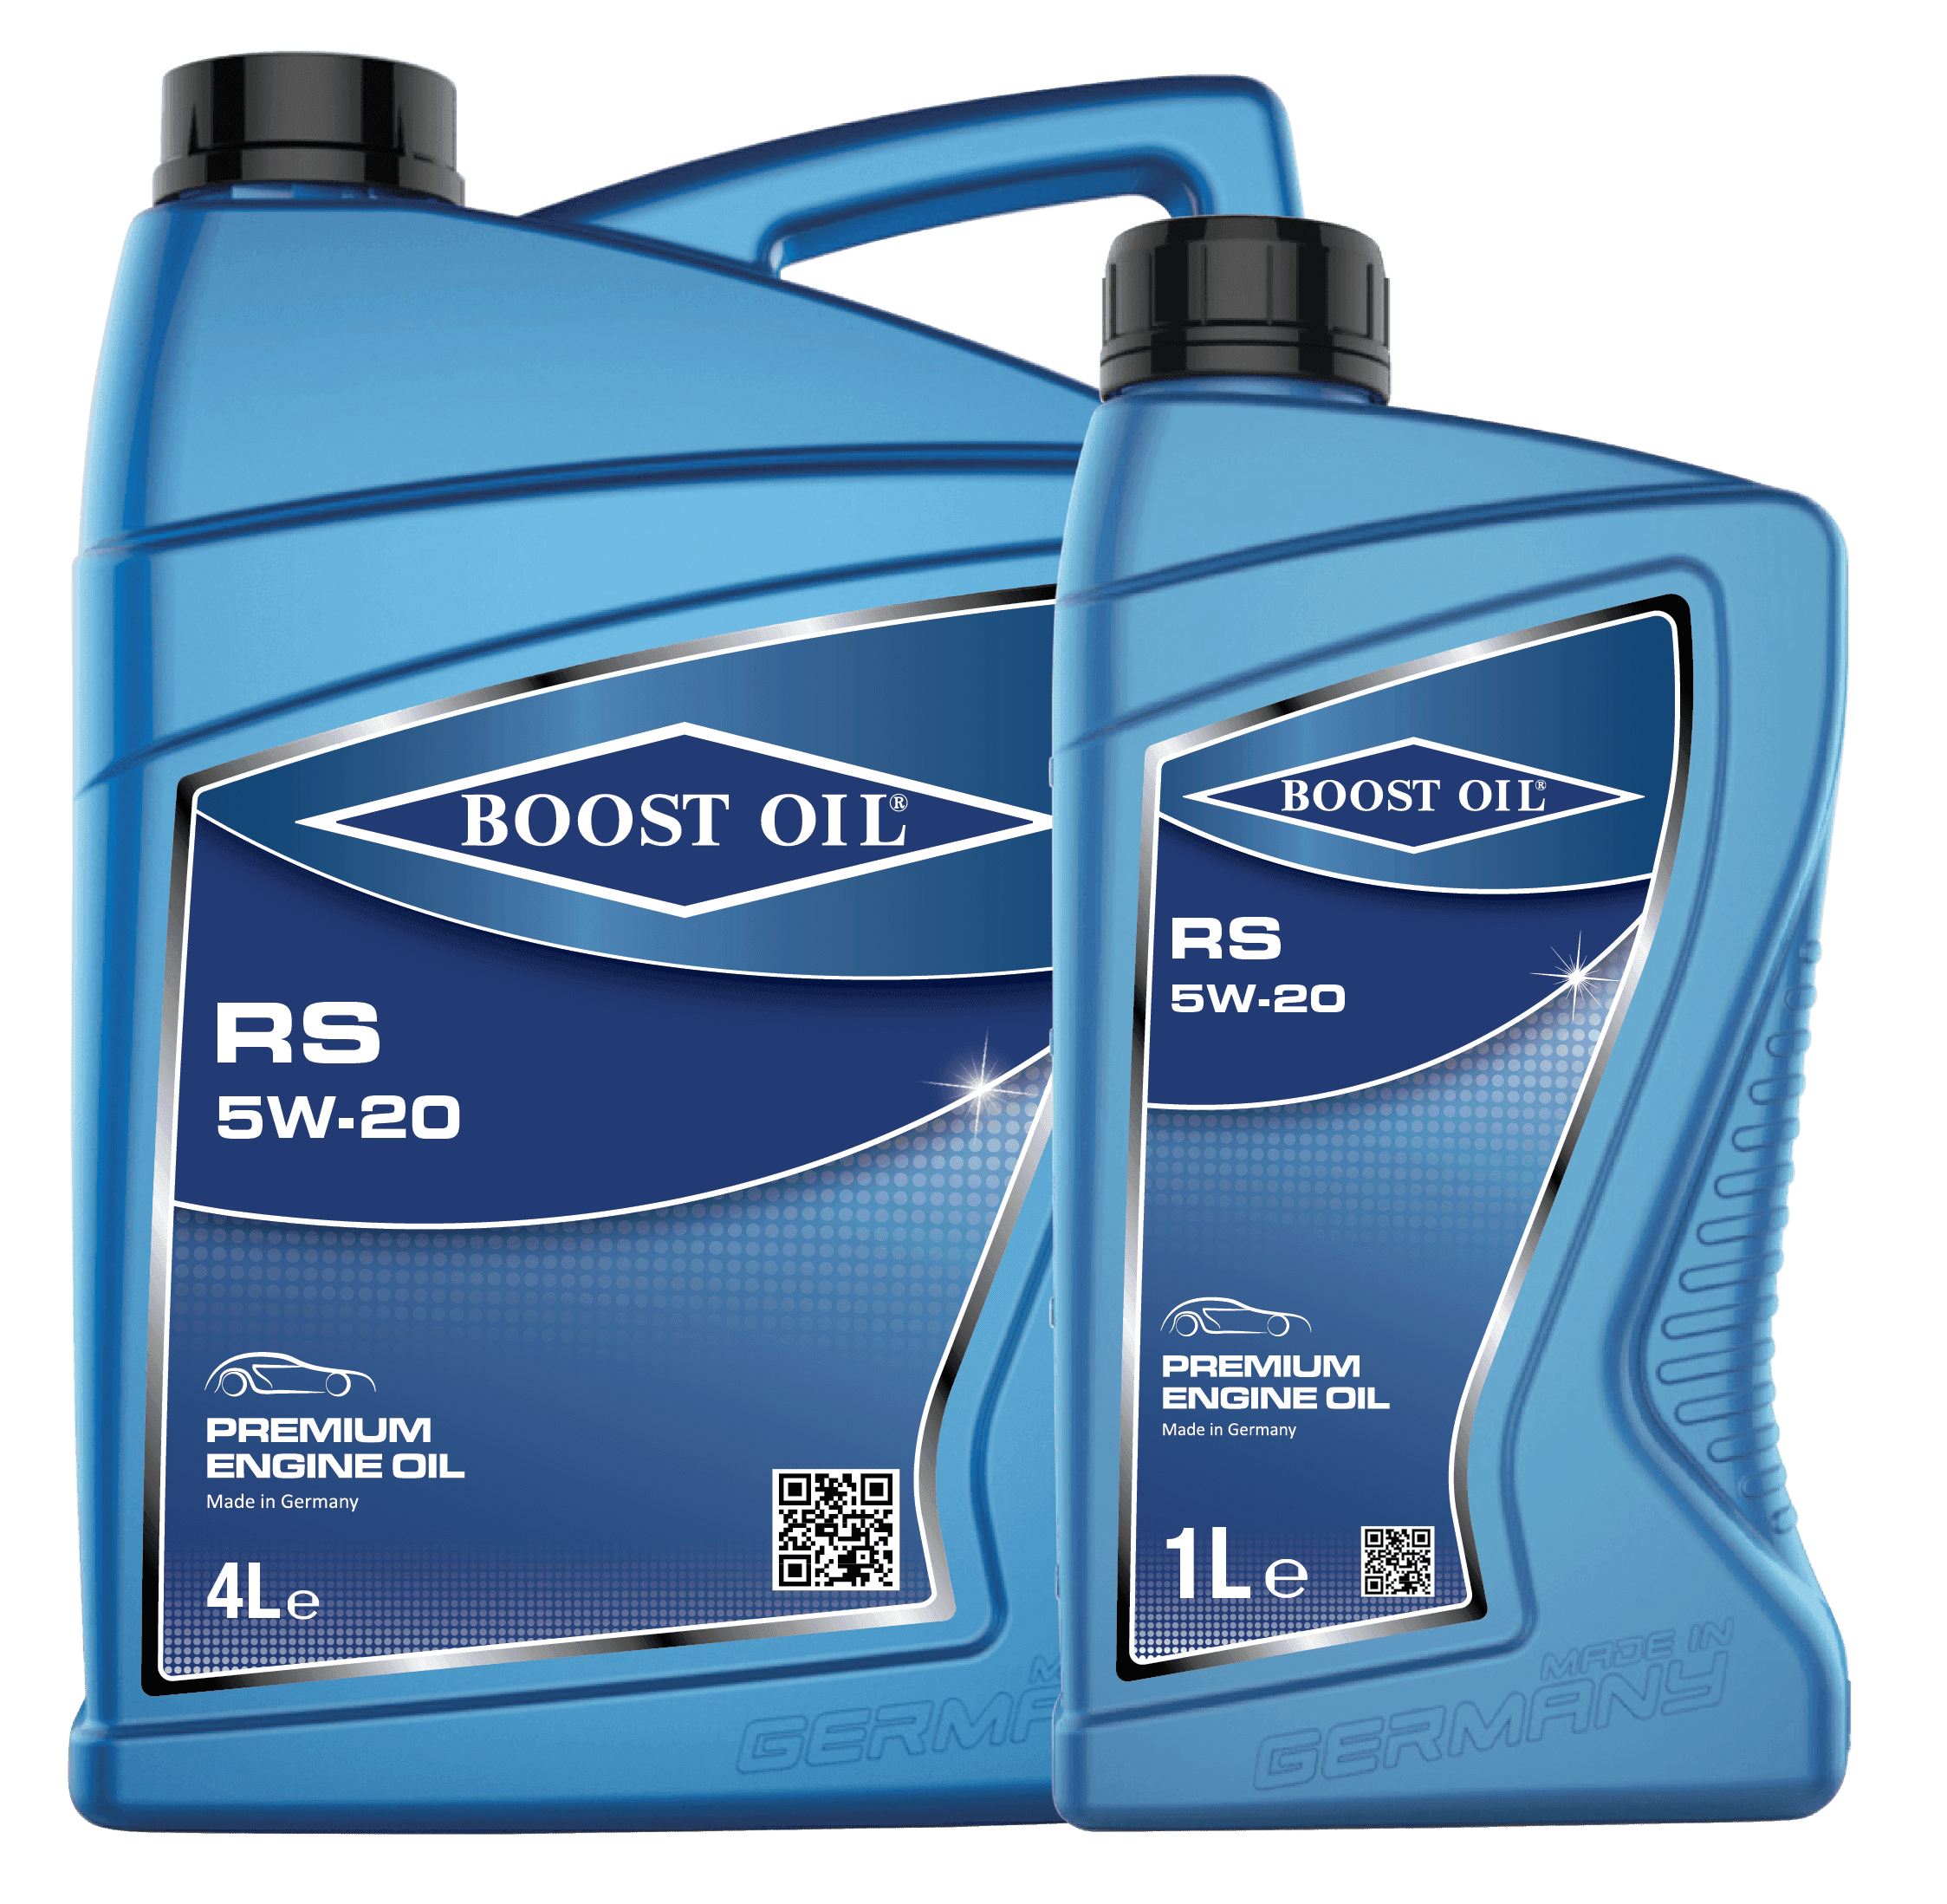 Product BOOST OIL RS 5W-20 - Boostoil image